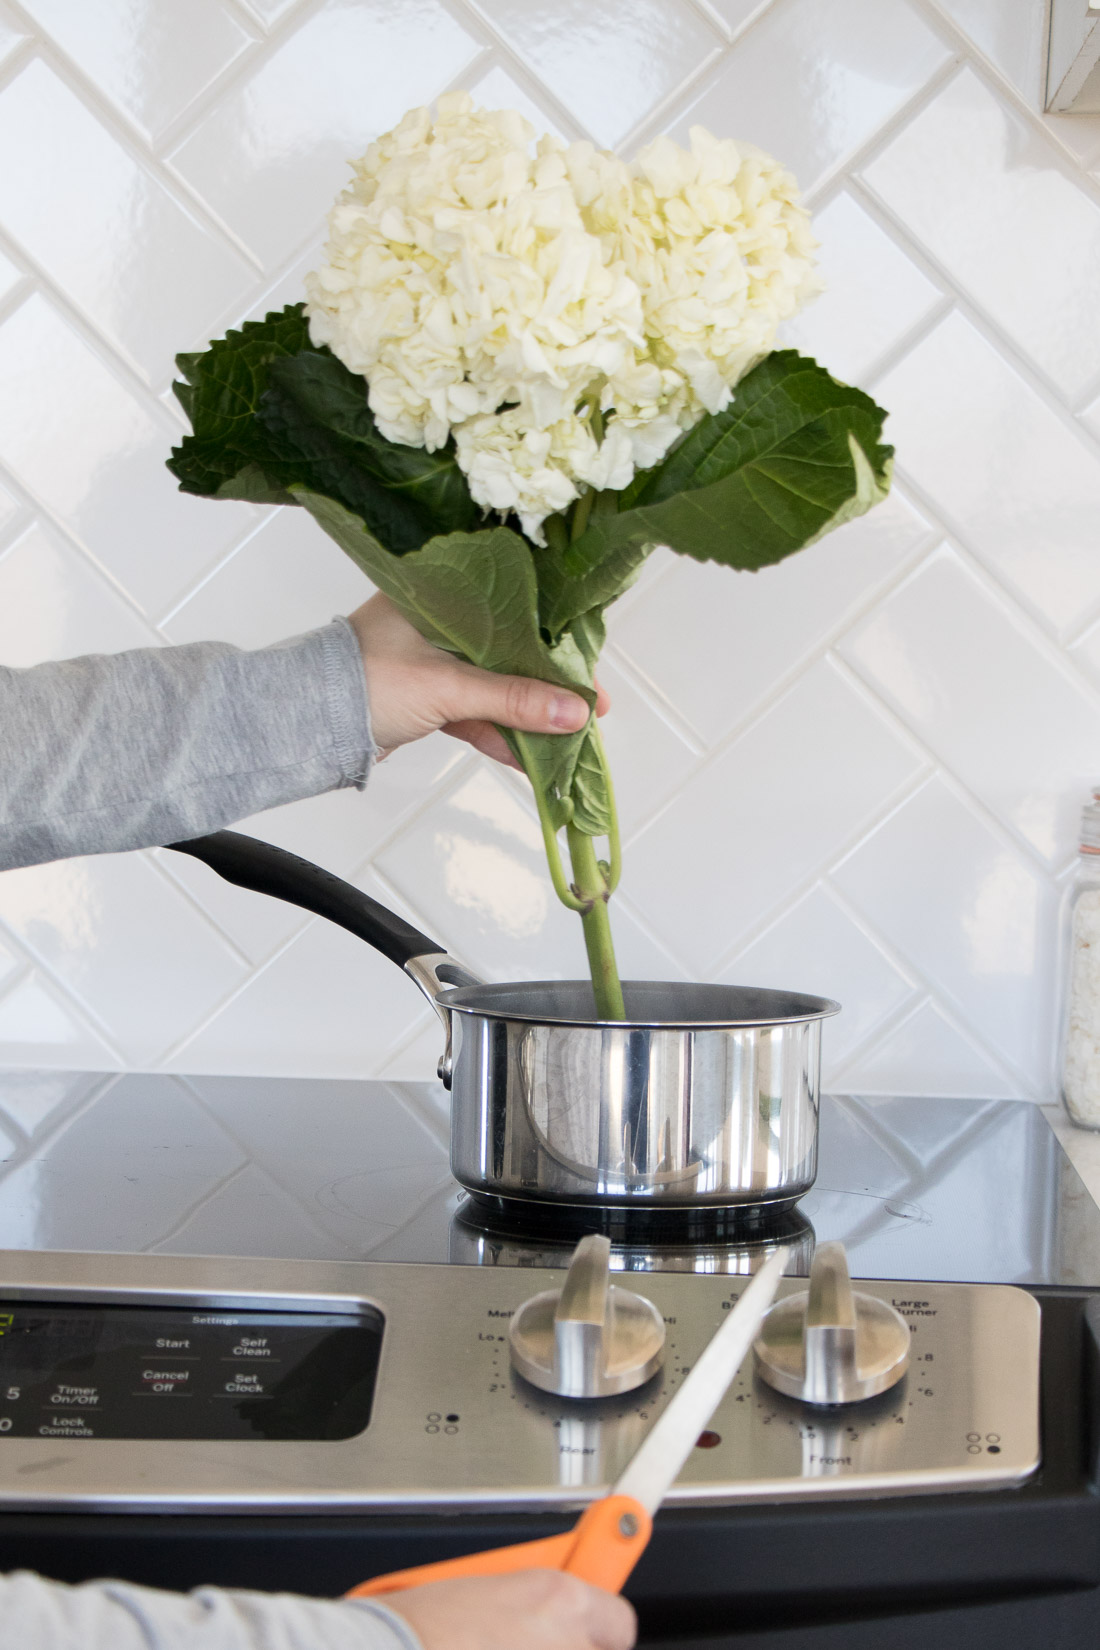 Boiling Hydrangea Stems to Perk Flowers Back Up 